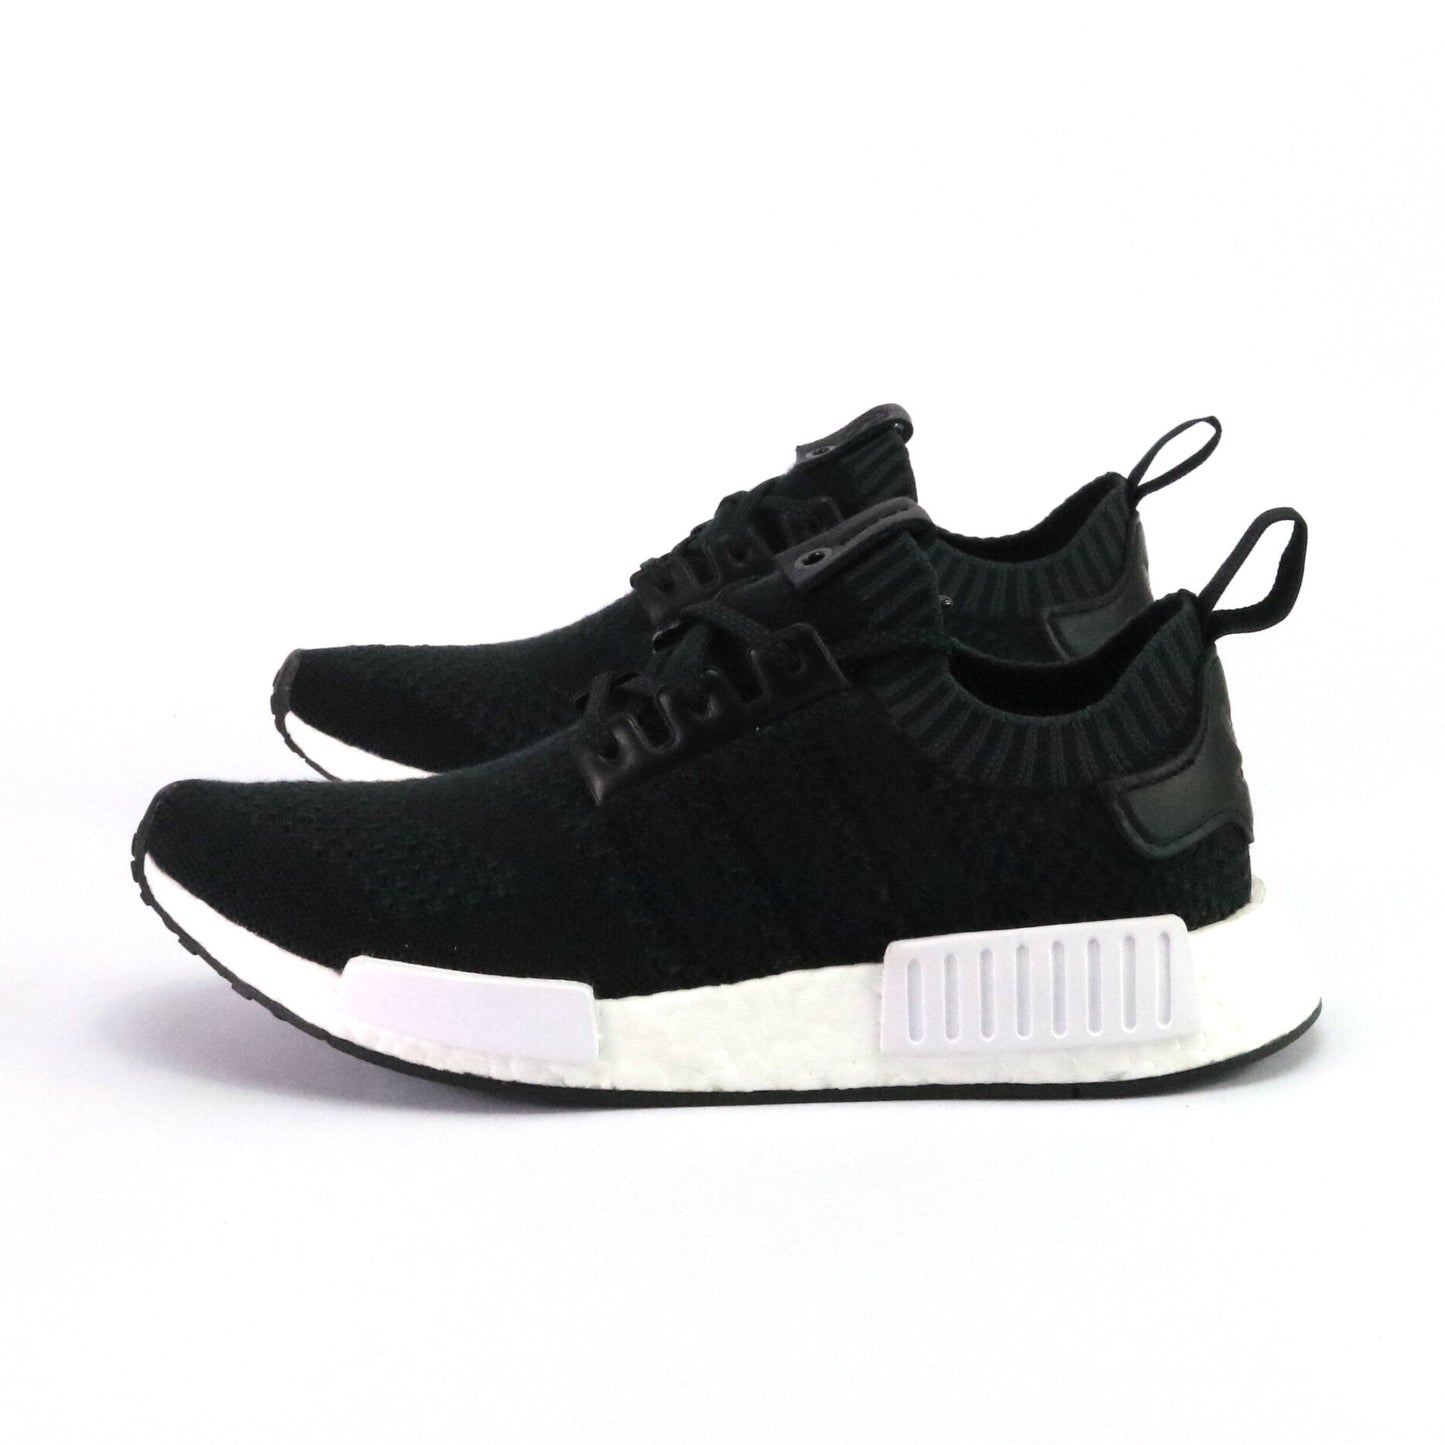 Adidas NMD R1 A Ma Maniere x Invincible Cashmere Wool